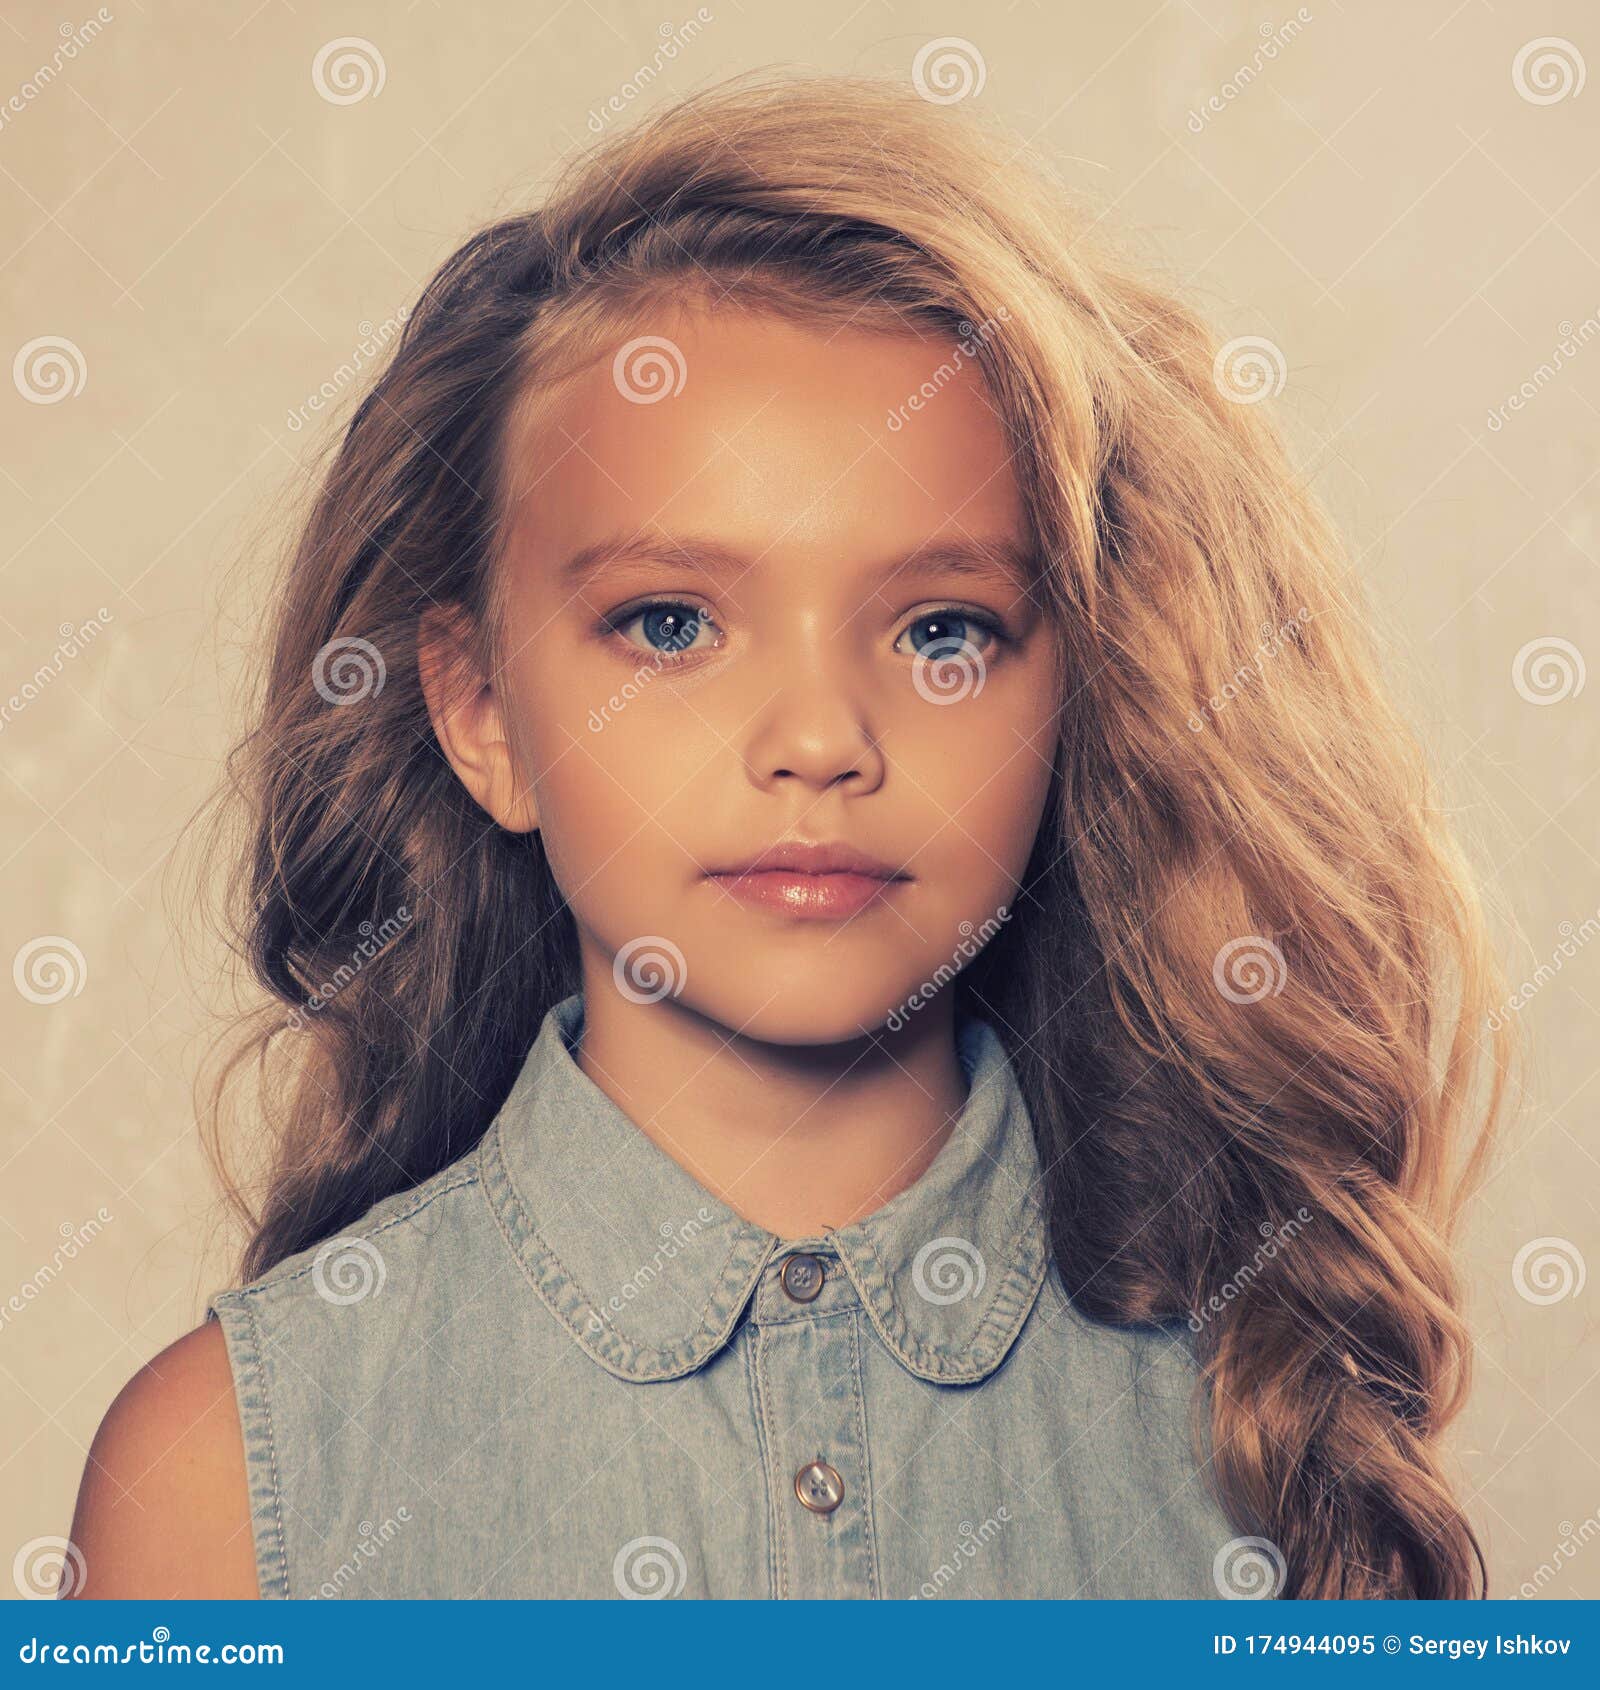 Portrait Of Cute Little 8-9 Year Old Girl With Blonde Hair, Wearing